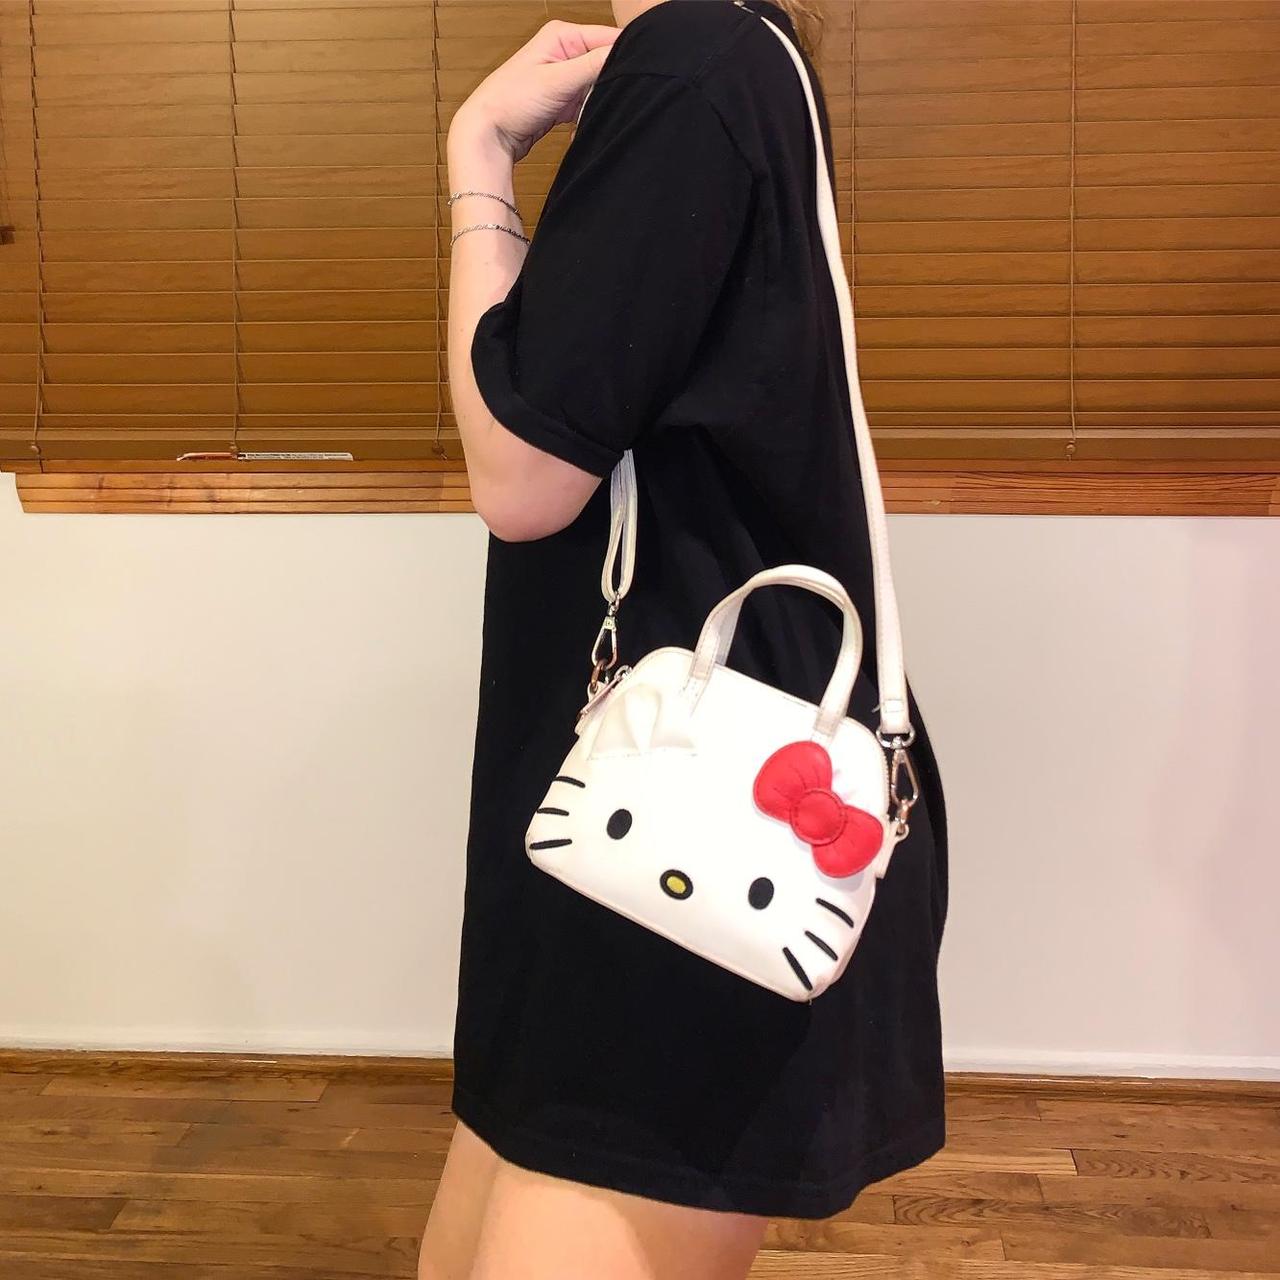 Large Black Hello Kitty Purse | www.theconservative.online